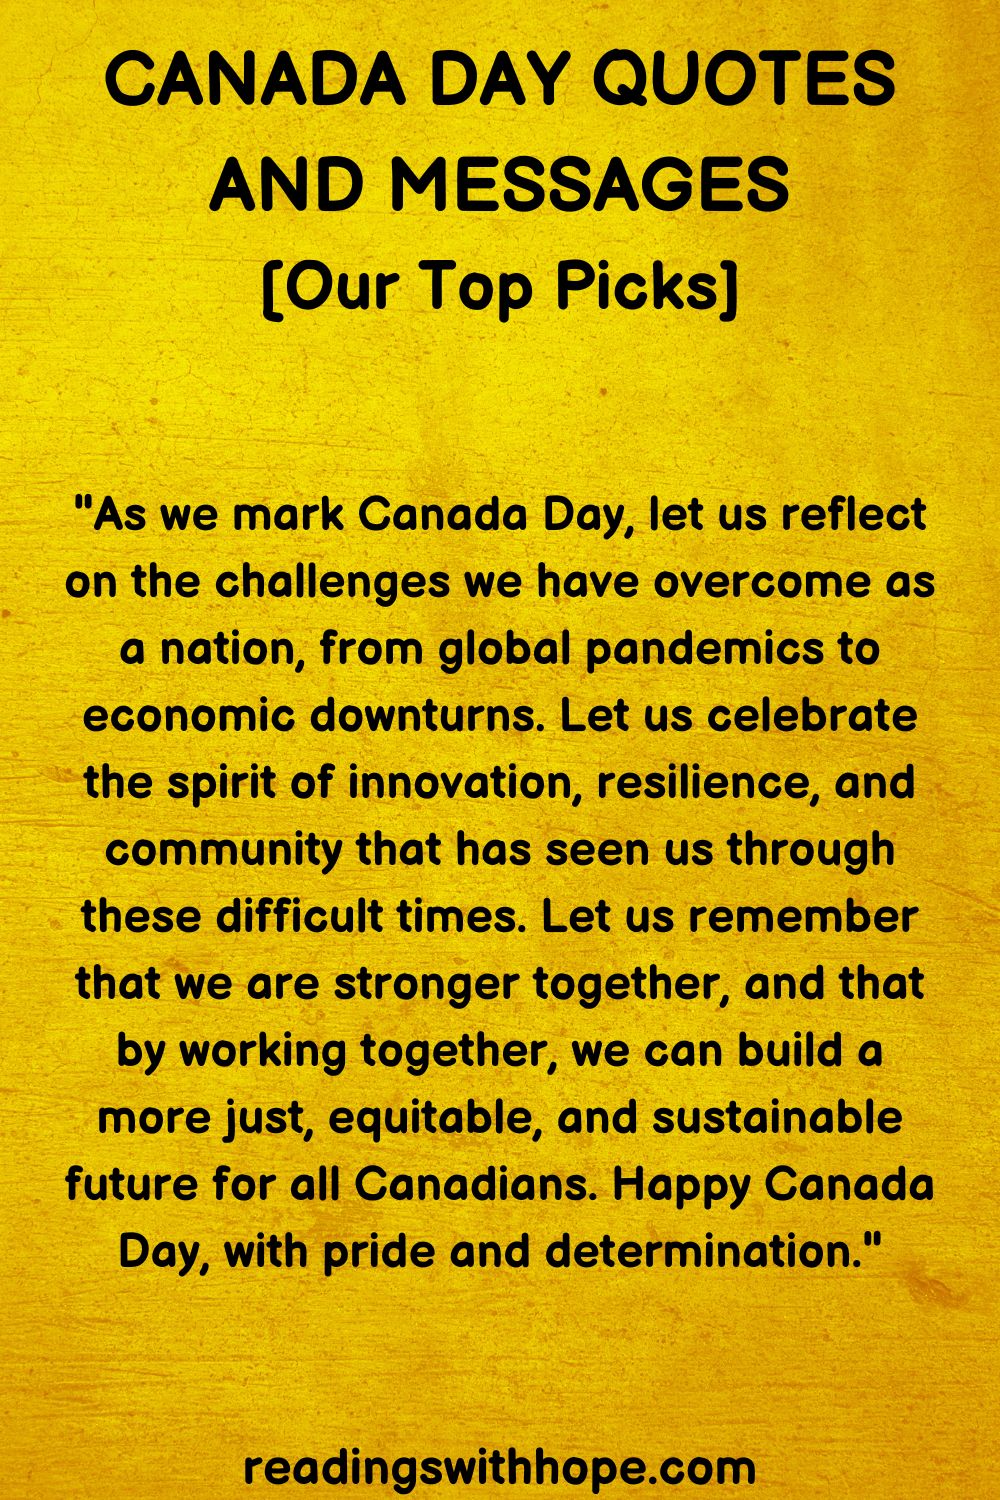 Canada Day Quotes and Messages